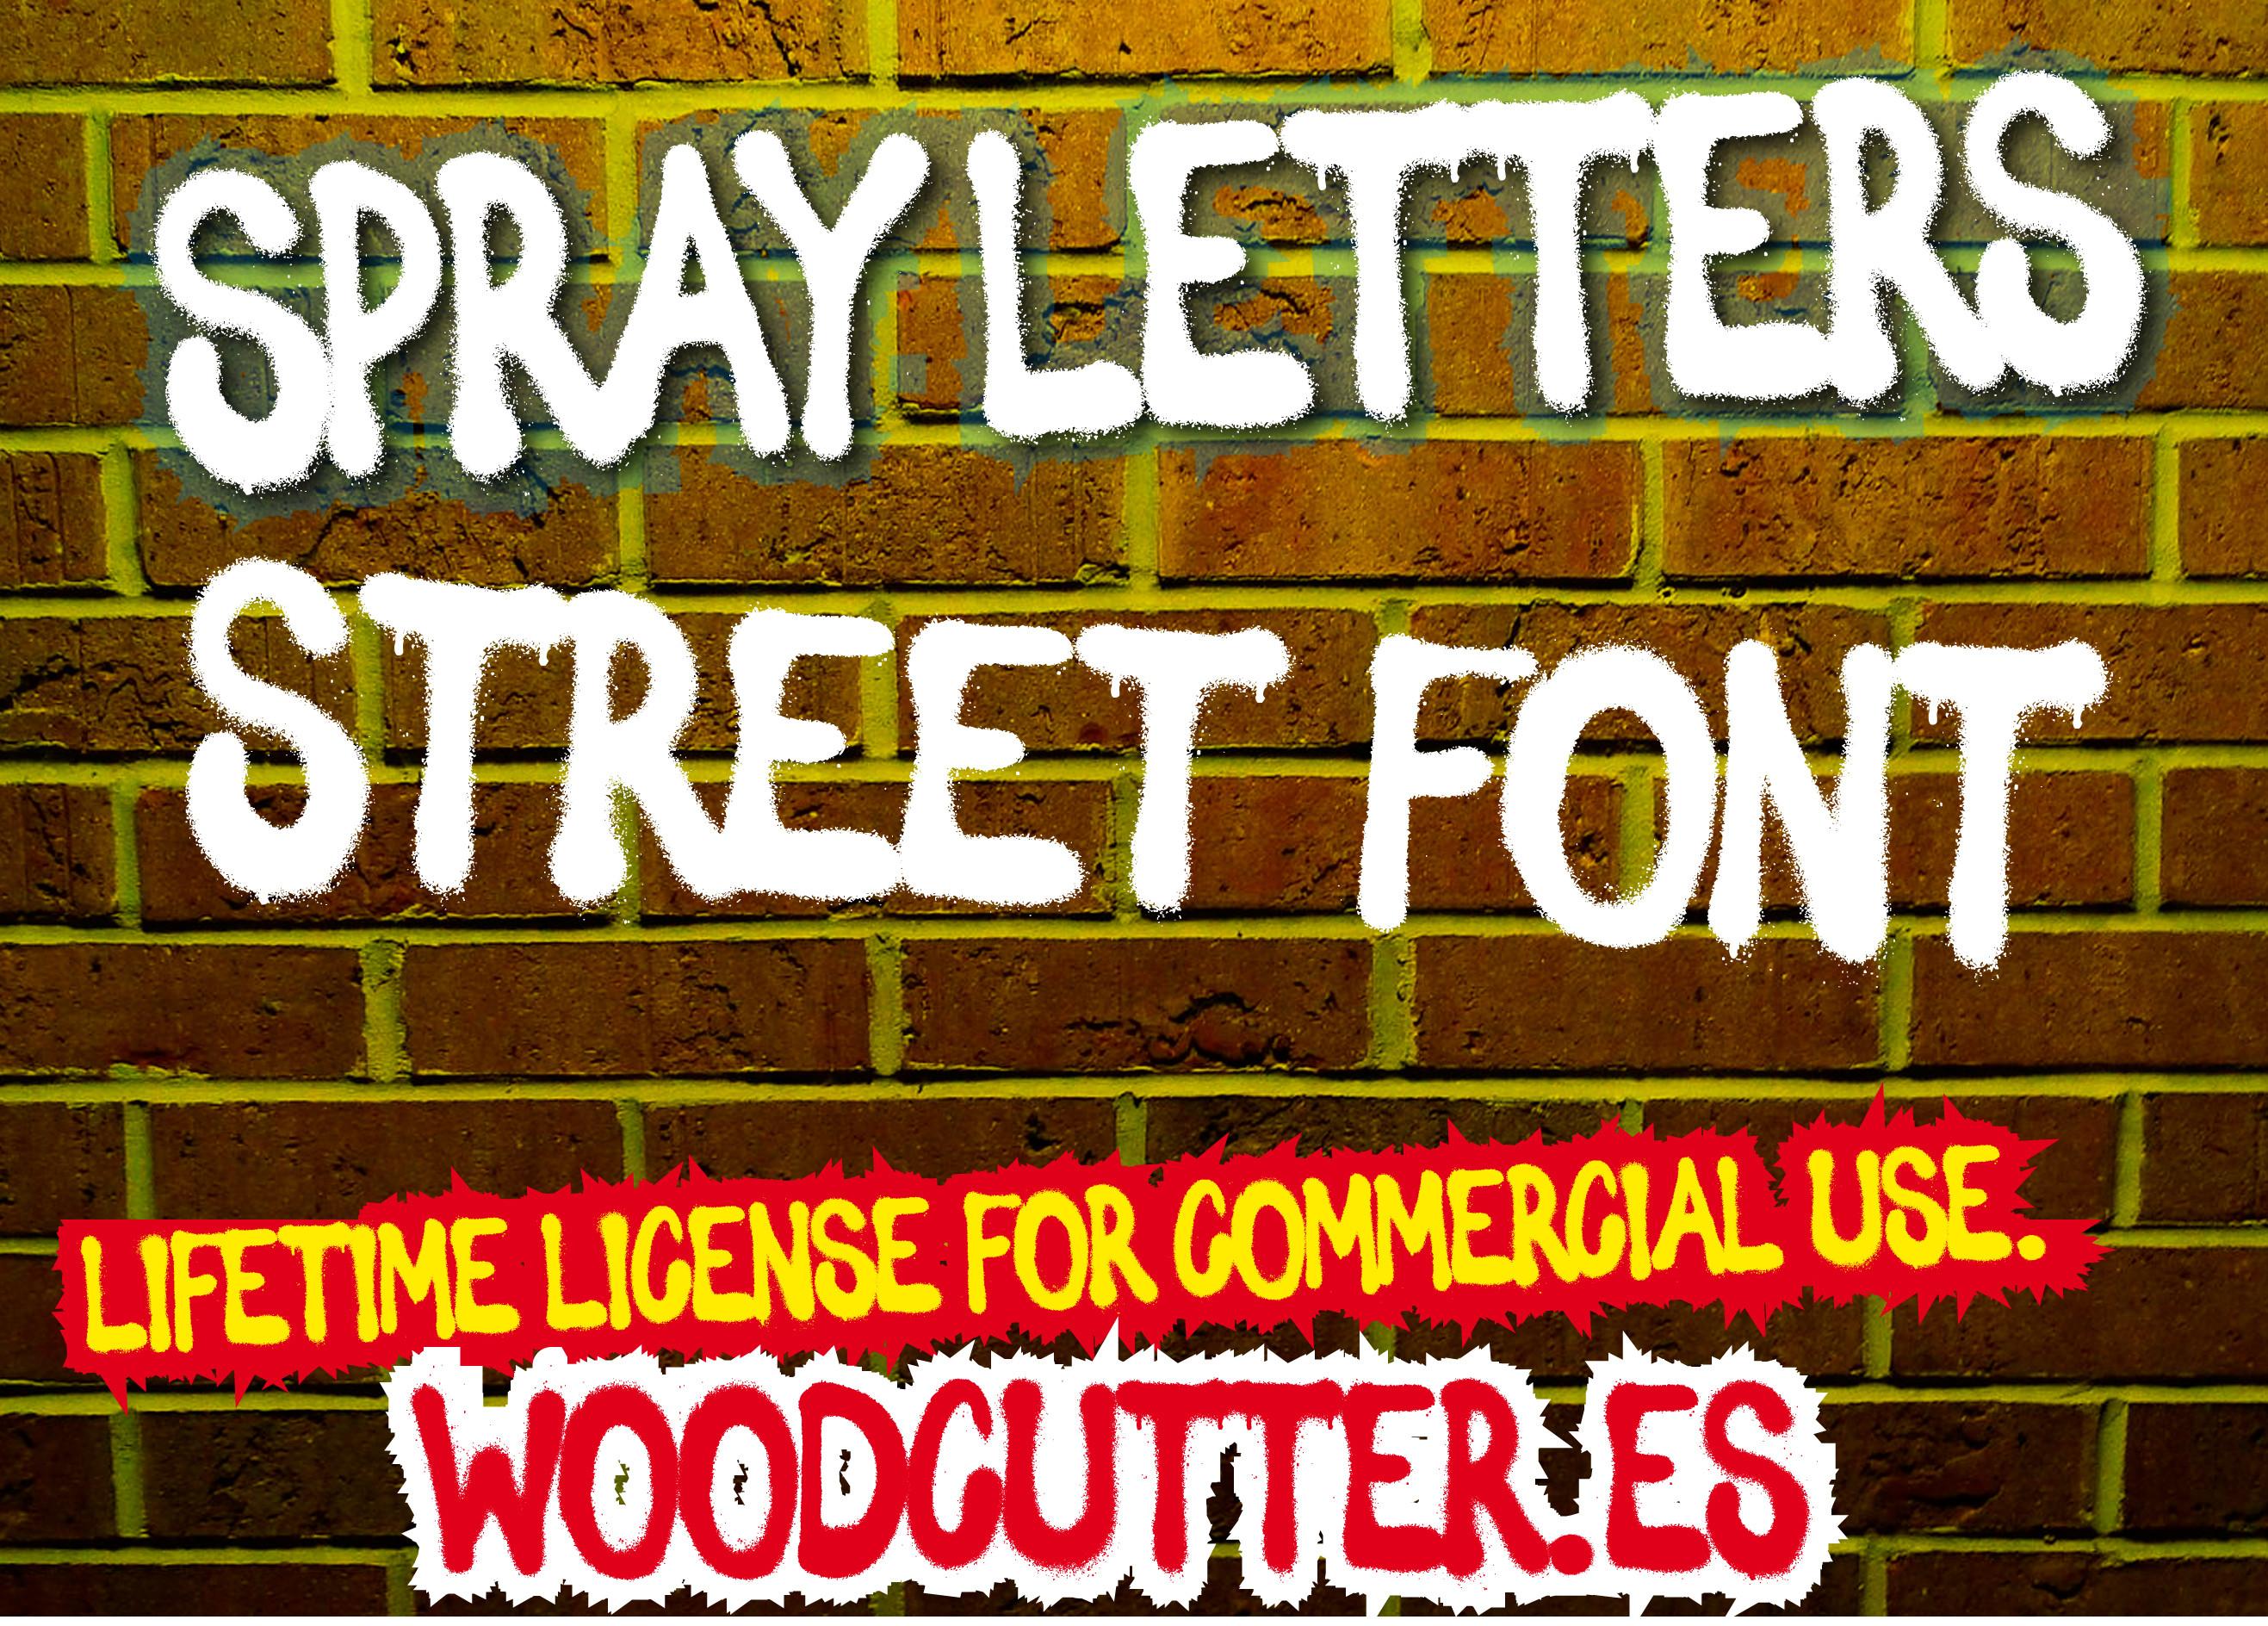 Spray Letters Font